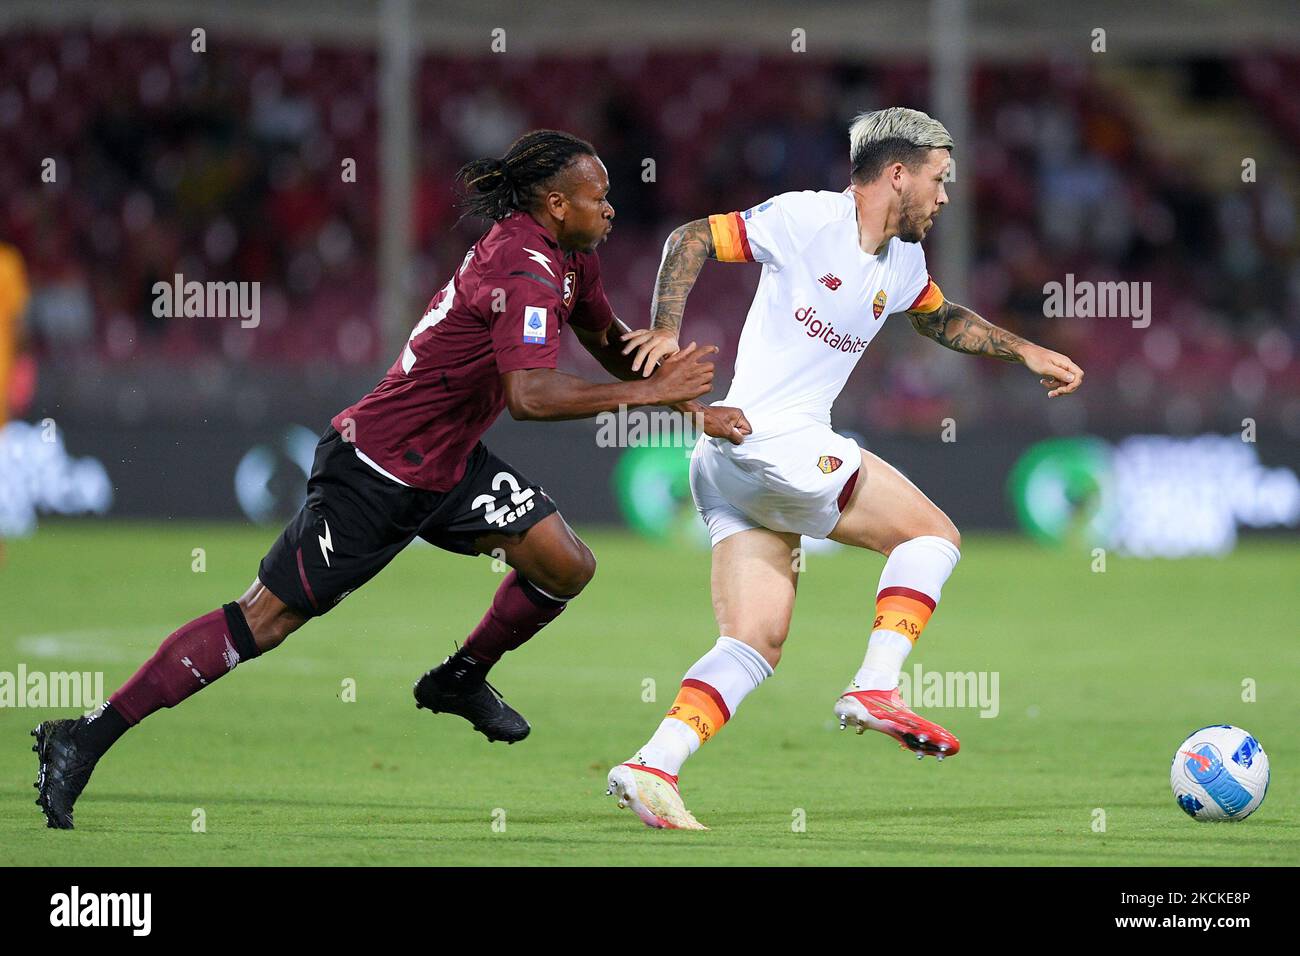 Carles Perez of AS Roma and Joel Obi of US Salernitana 1919 compete for the ball during the Serie A match between US Salernitana 1919 and AS Roma at Stadio Arechi, Salerno, Italy on 29 August 2021. (Photo by Giuseppe Maffia/NurPhoto) Stock Photo